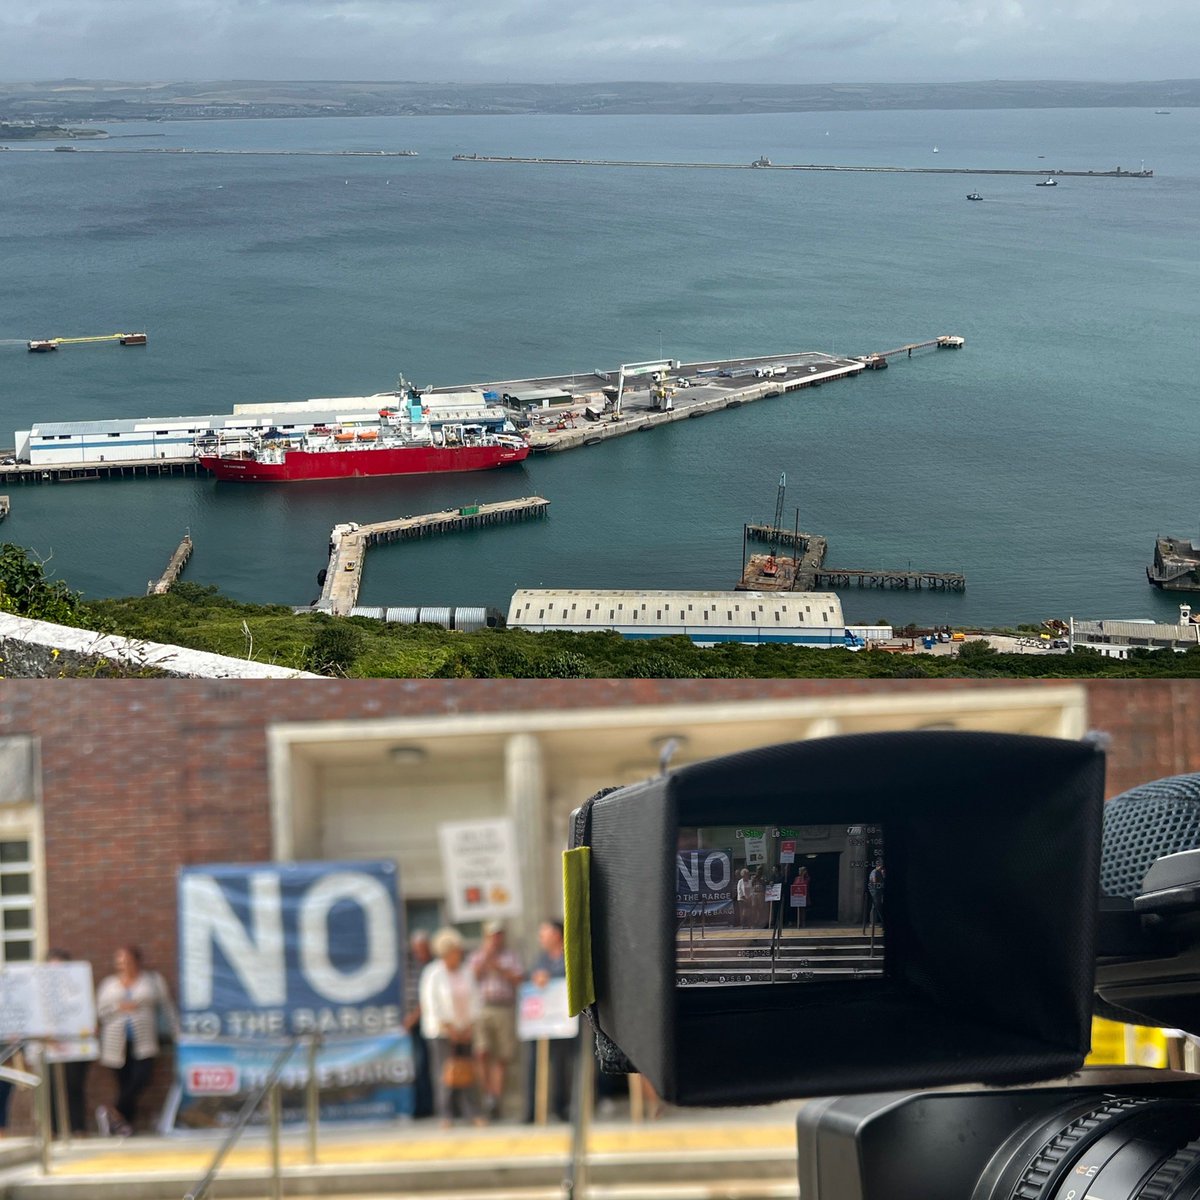 Well I know where I will be #filming tomorrow?
#Bibbystockholm #Immigrantbarge #NototheBarge #immigrantswelcome #Portland #Dorset #BGTW #freelancecameraman  #News British Guild of Travel Writers #travelwritersuk
#NUJ